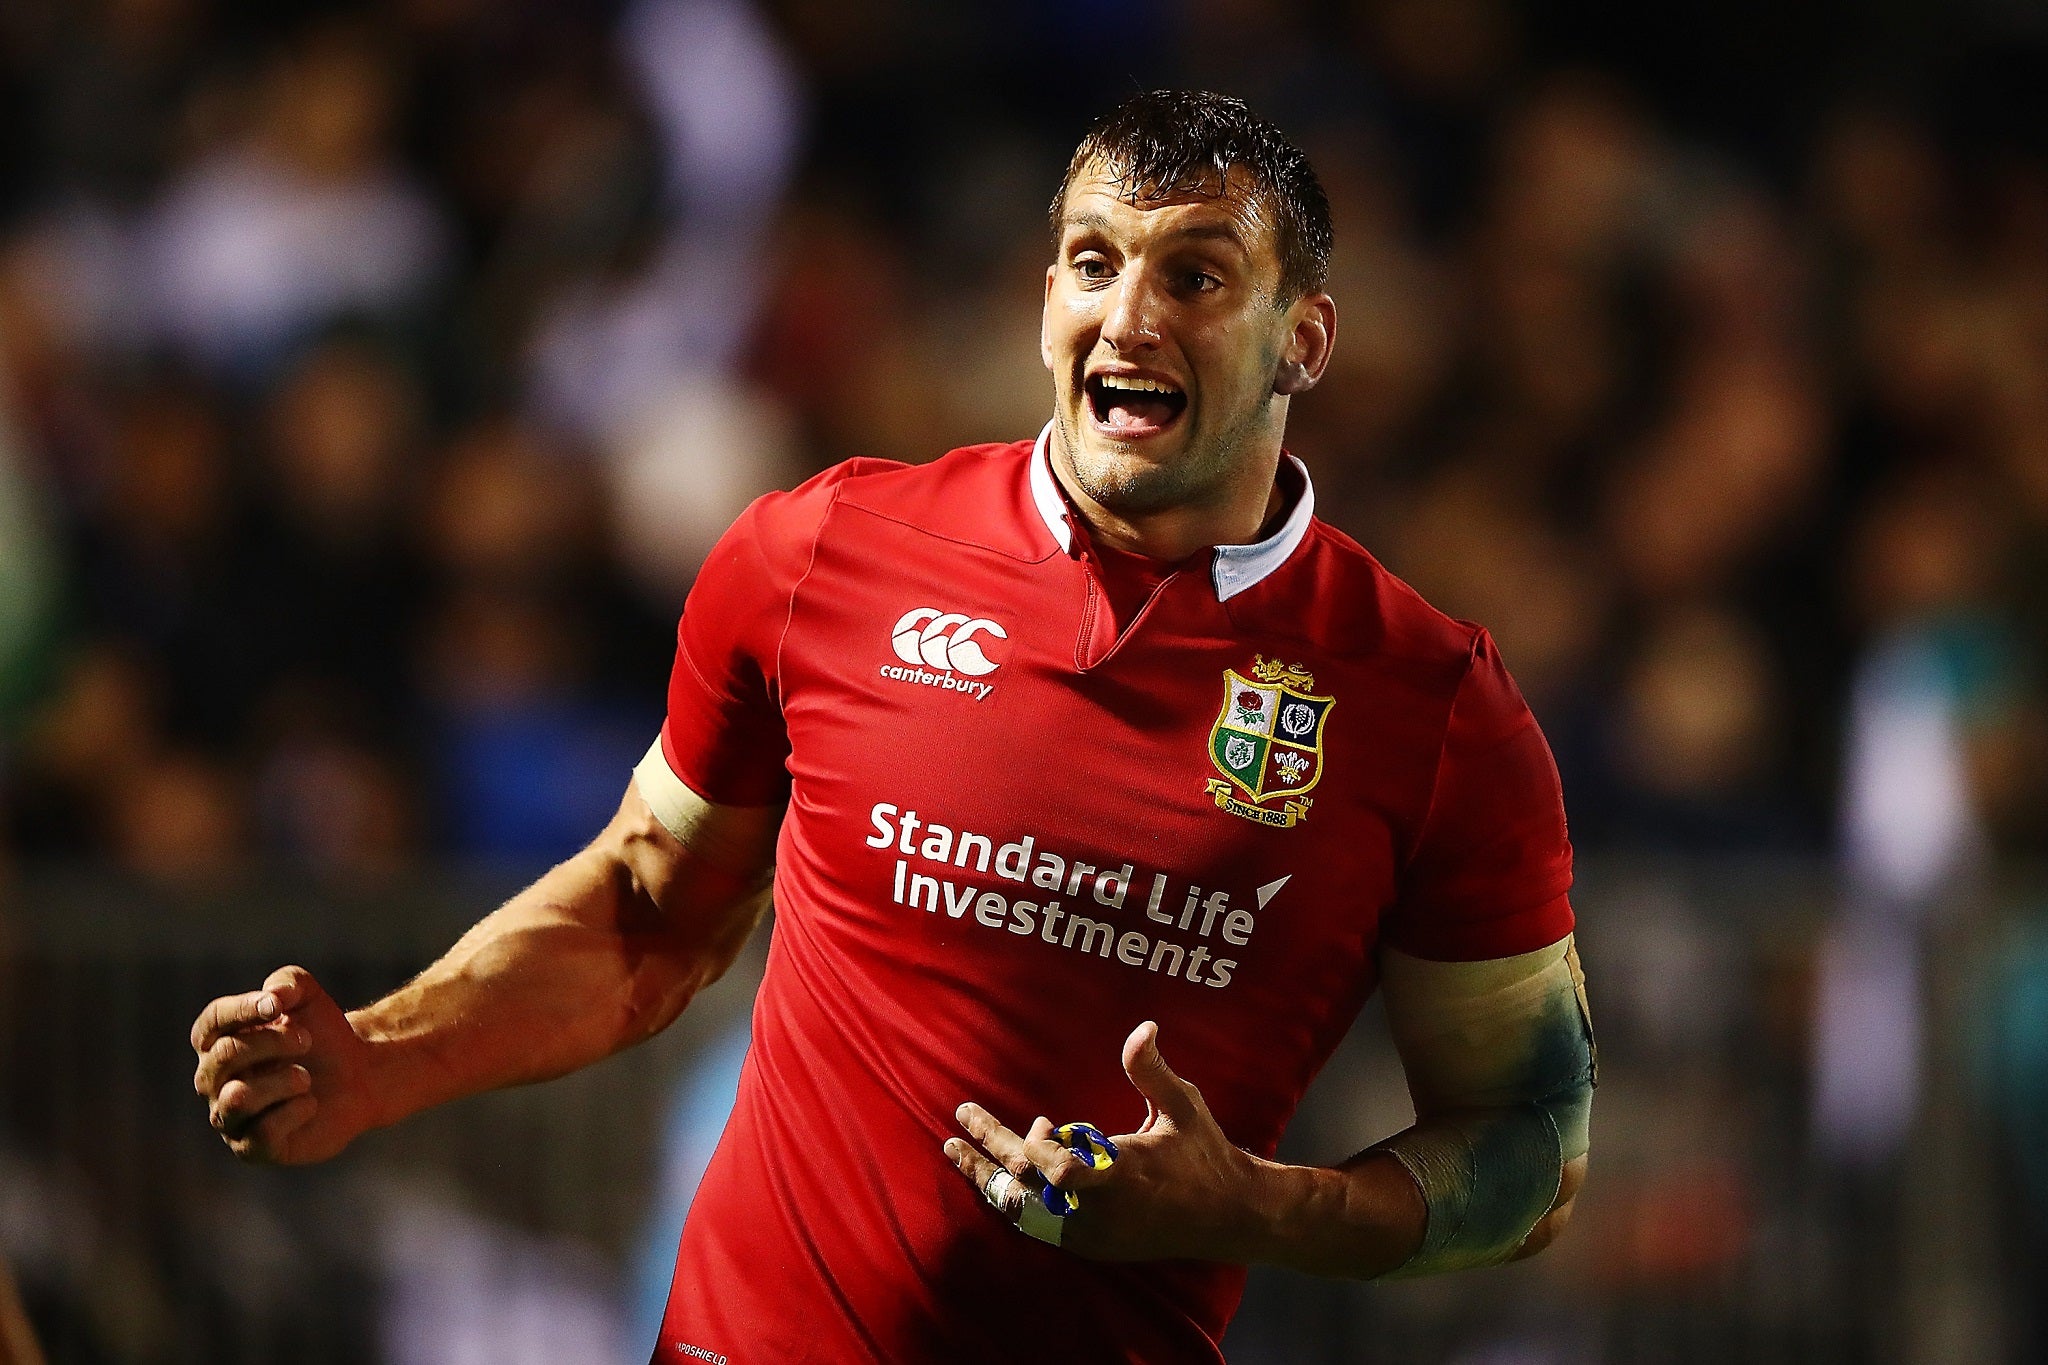 Sam Warburton will miss the Crusaders match with a sore ankle but should play again before the Test series